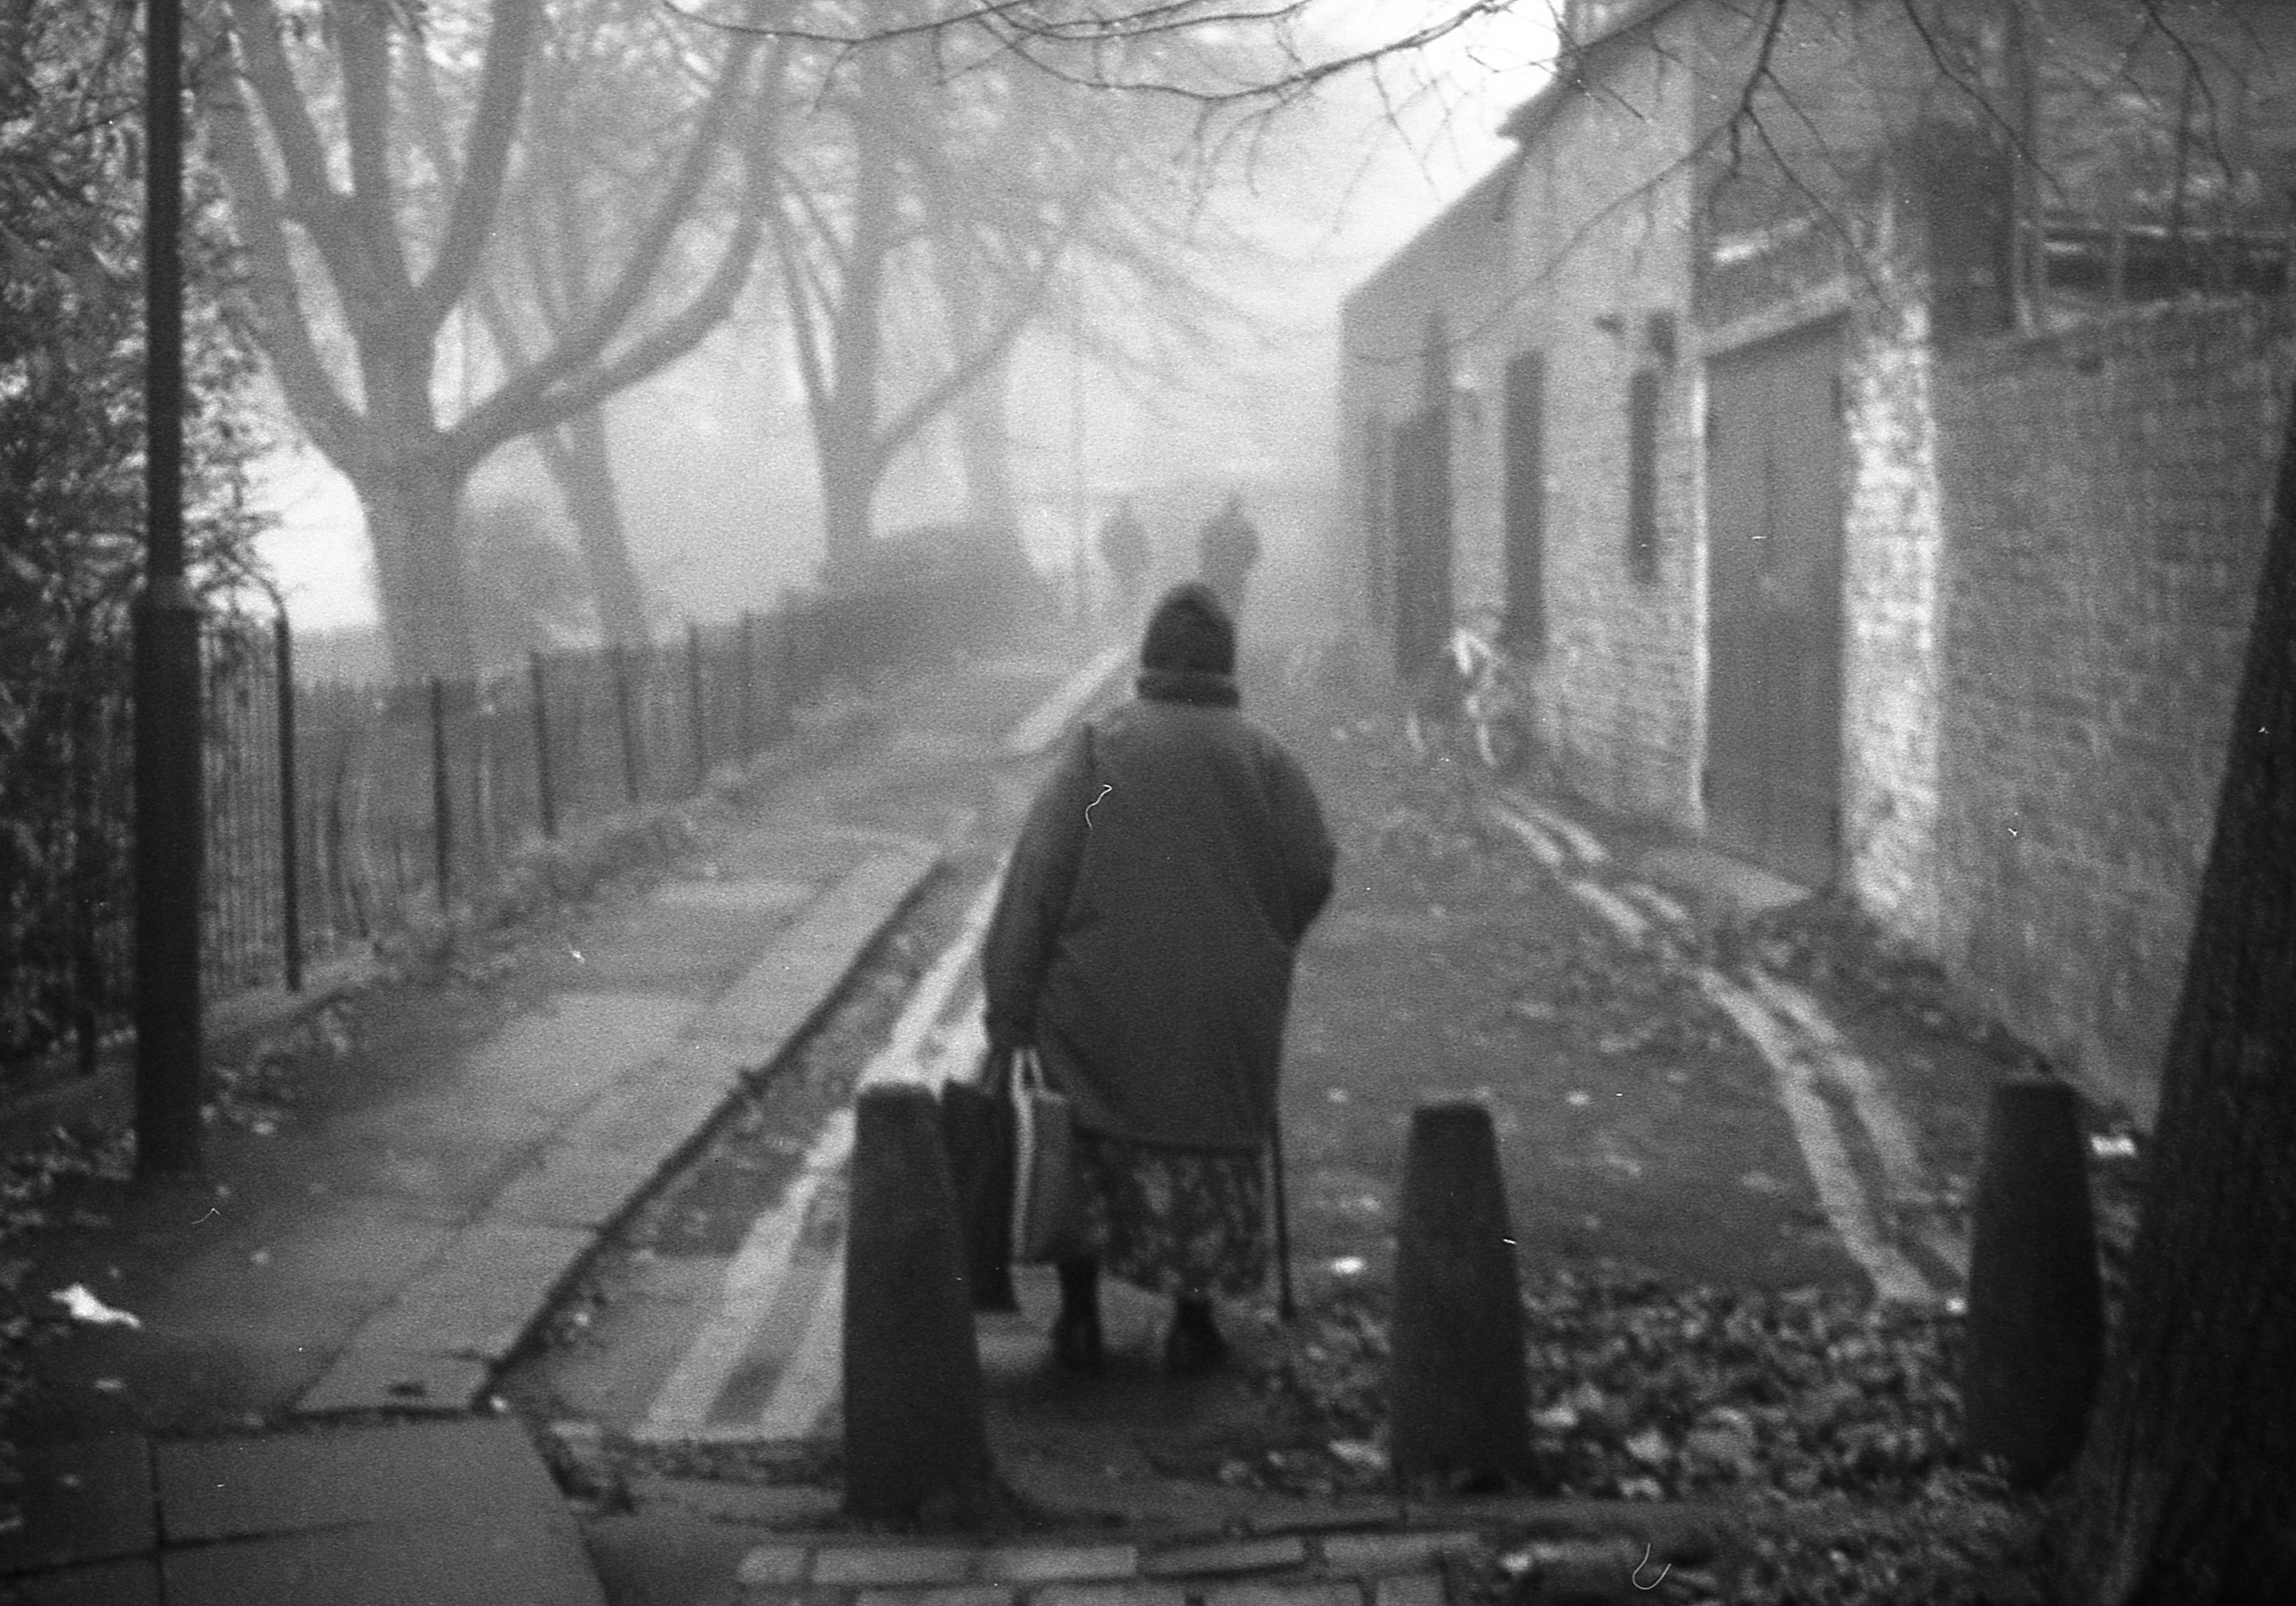 image of an old woman in a big jacket and a woolen cap on her head, turned away from the camera, walking down an old cobblestone street. to her left side is a line of trees, to her right a streak of old houses. fog smears the whole image.